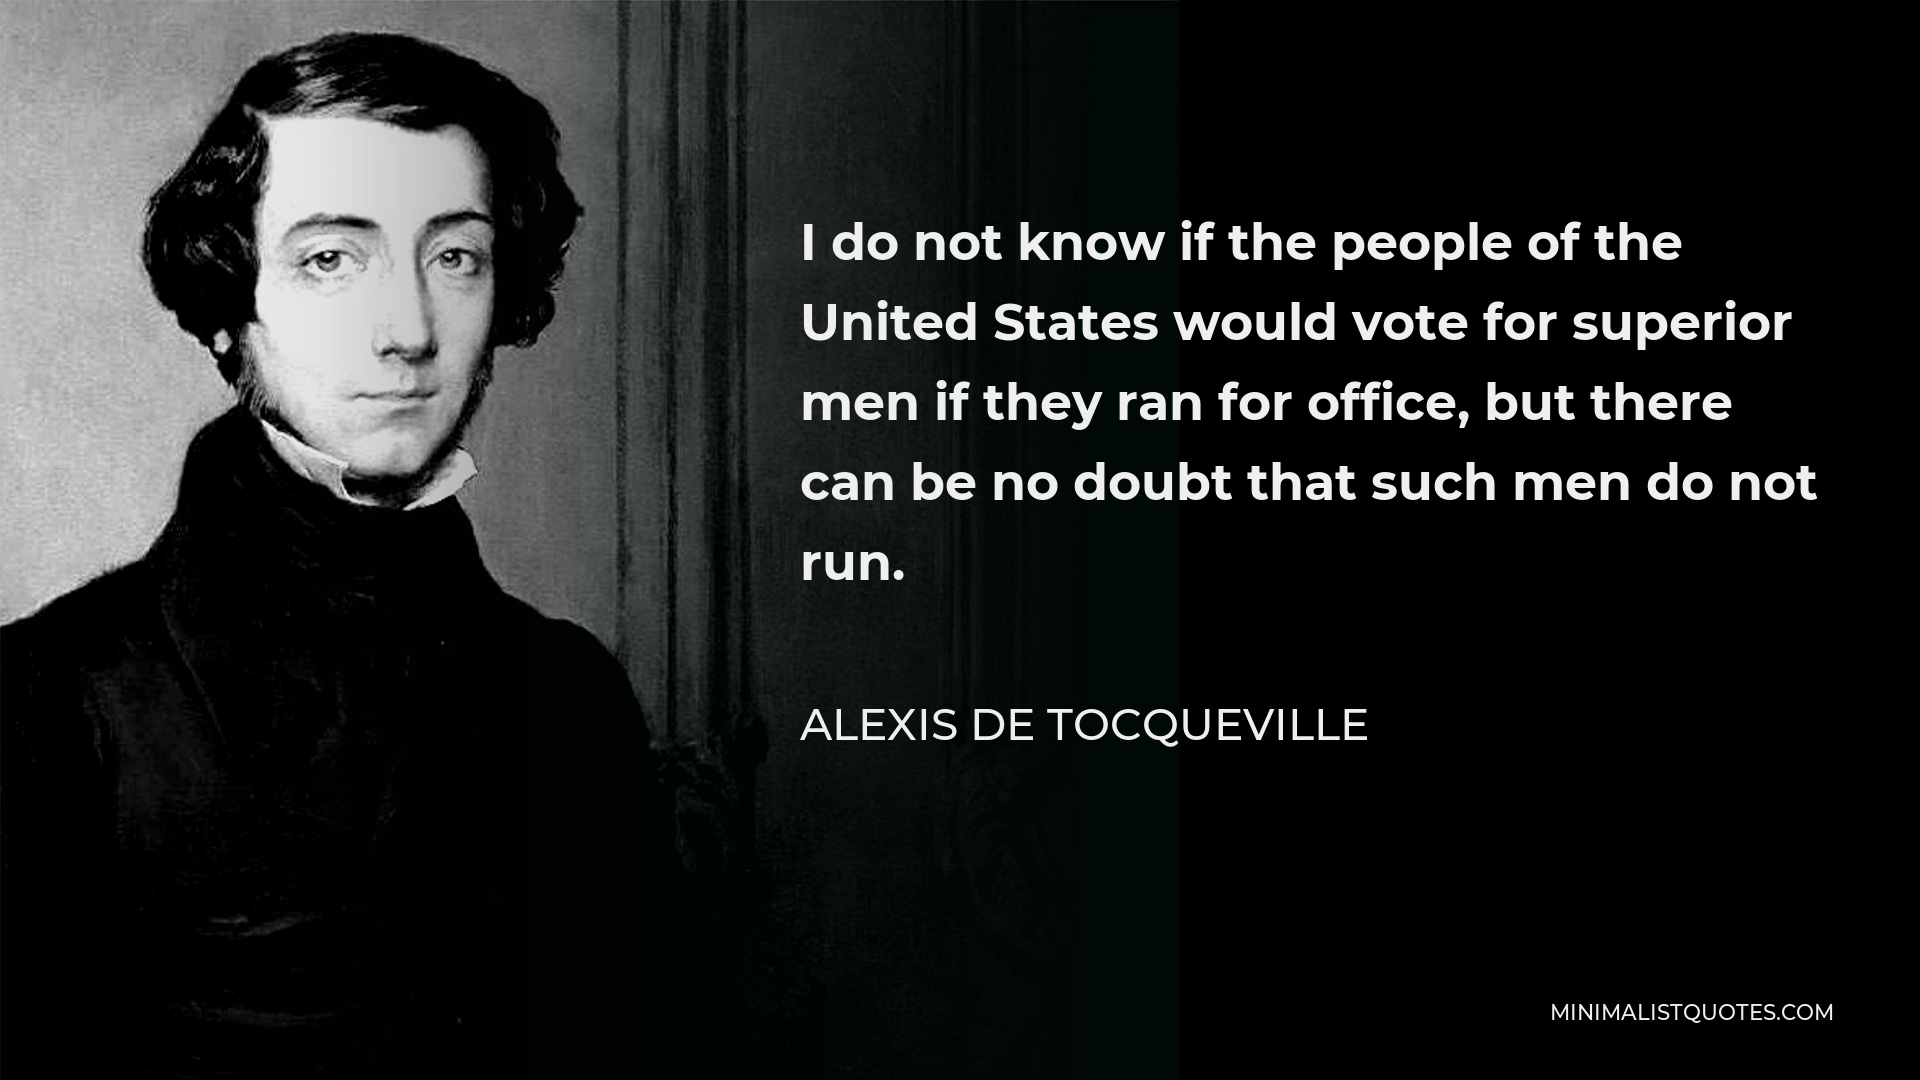 Alexis de Tocqueville Quote - I do not know if the people of the United States would vote for superior men if they ran for office, but there can be no doubt that such men do not run.